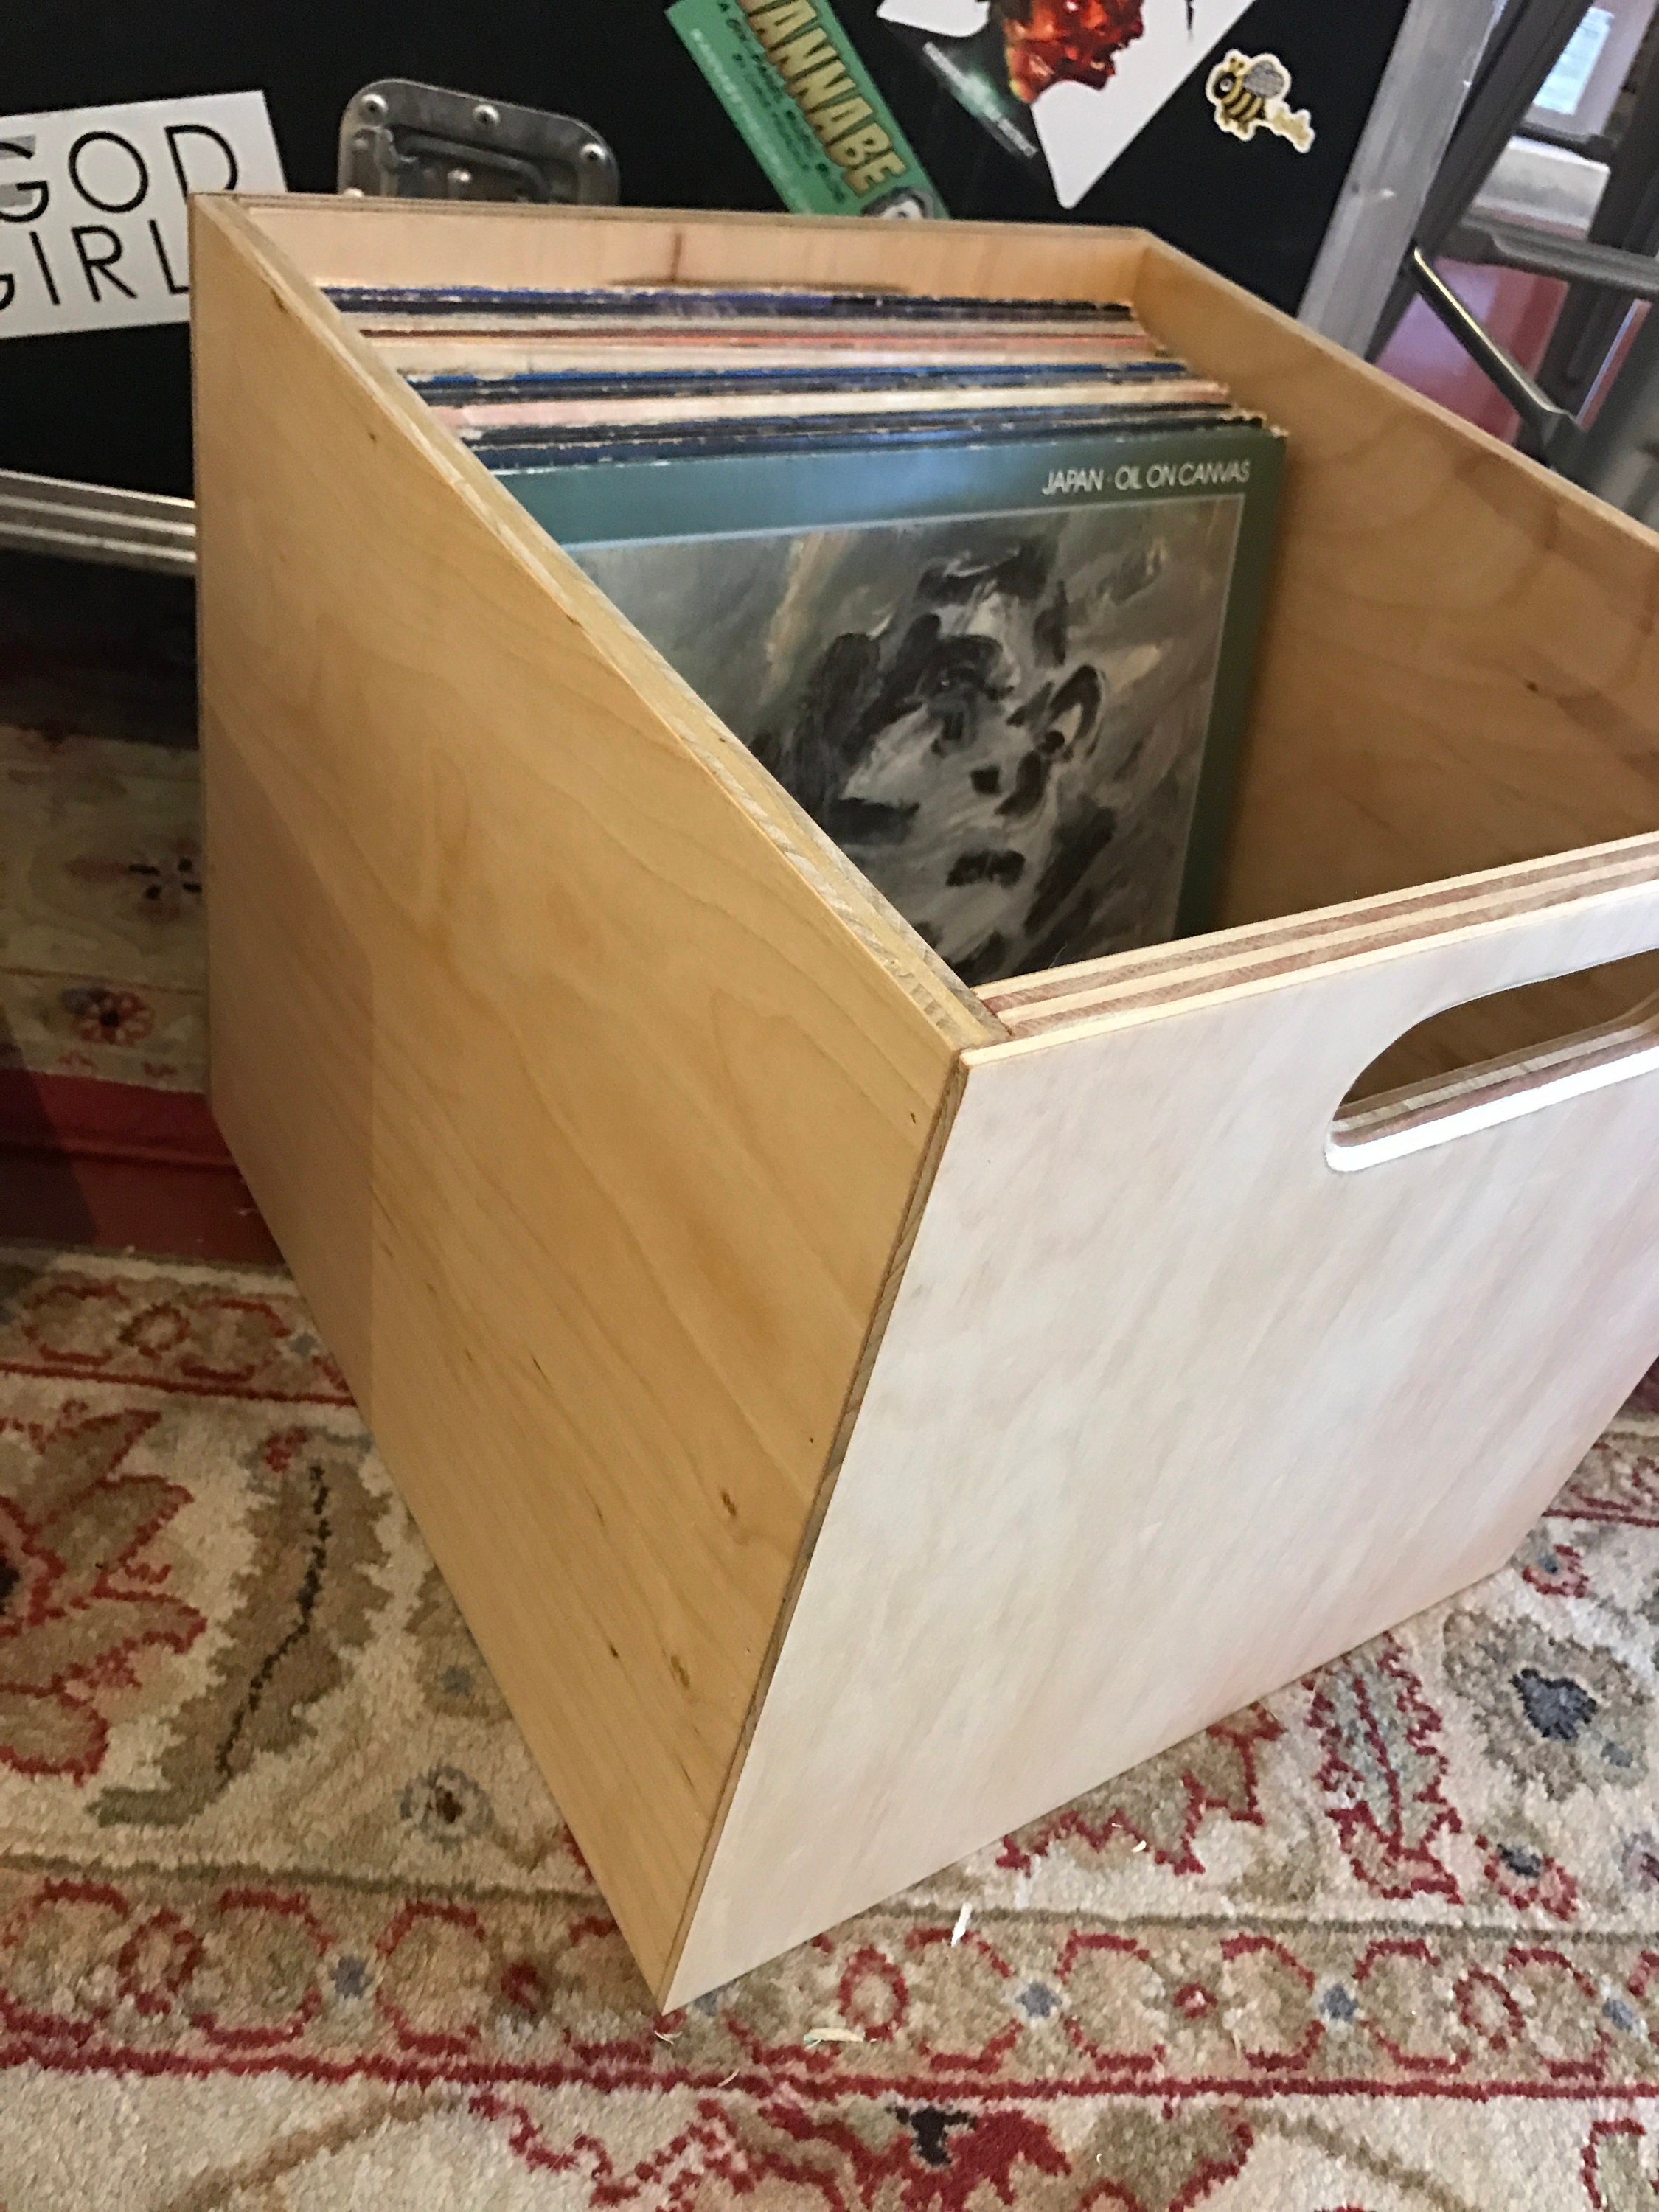  Retro Musique Wooden Vinyl LP Record Storage Crate on Wheels  for Easy Mobility